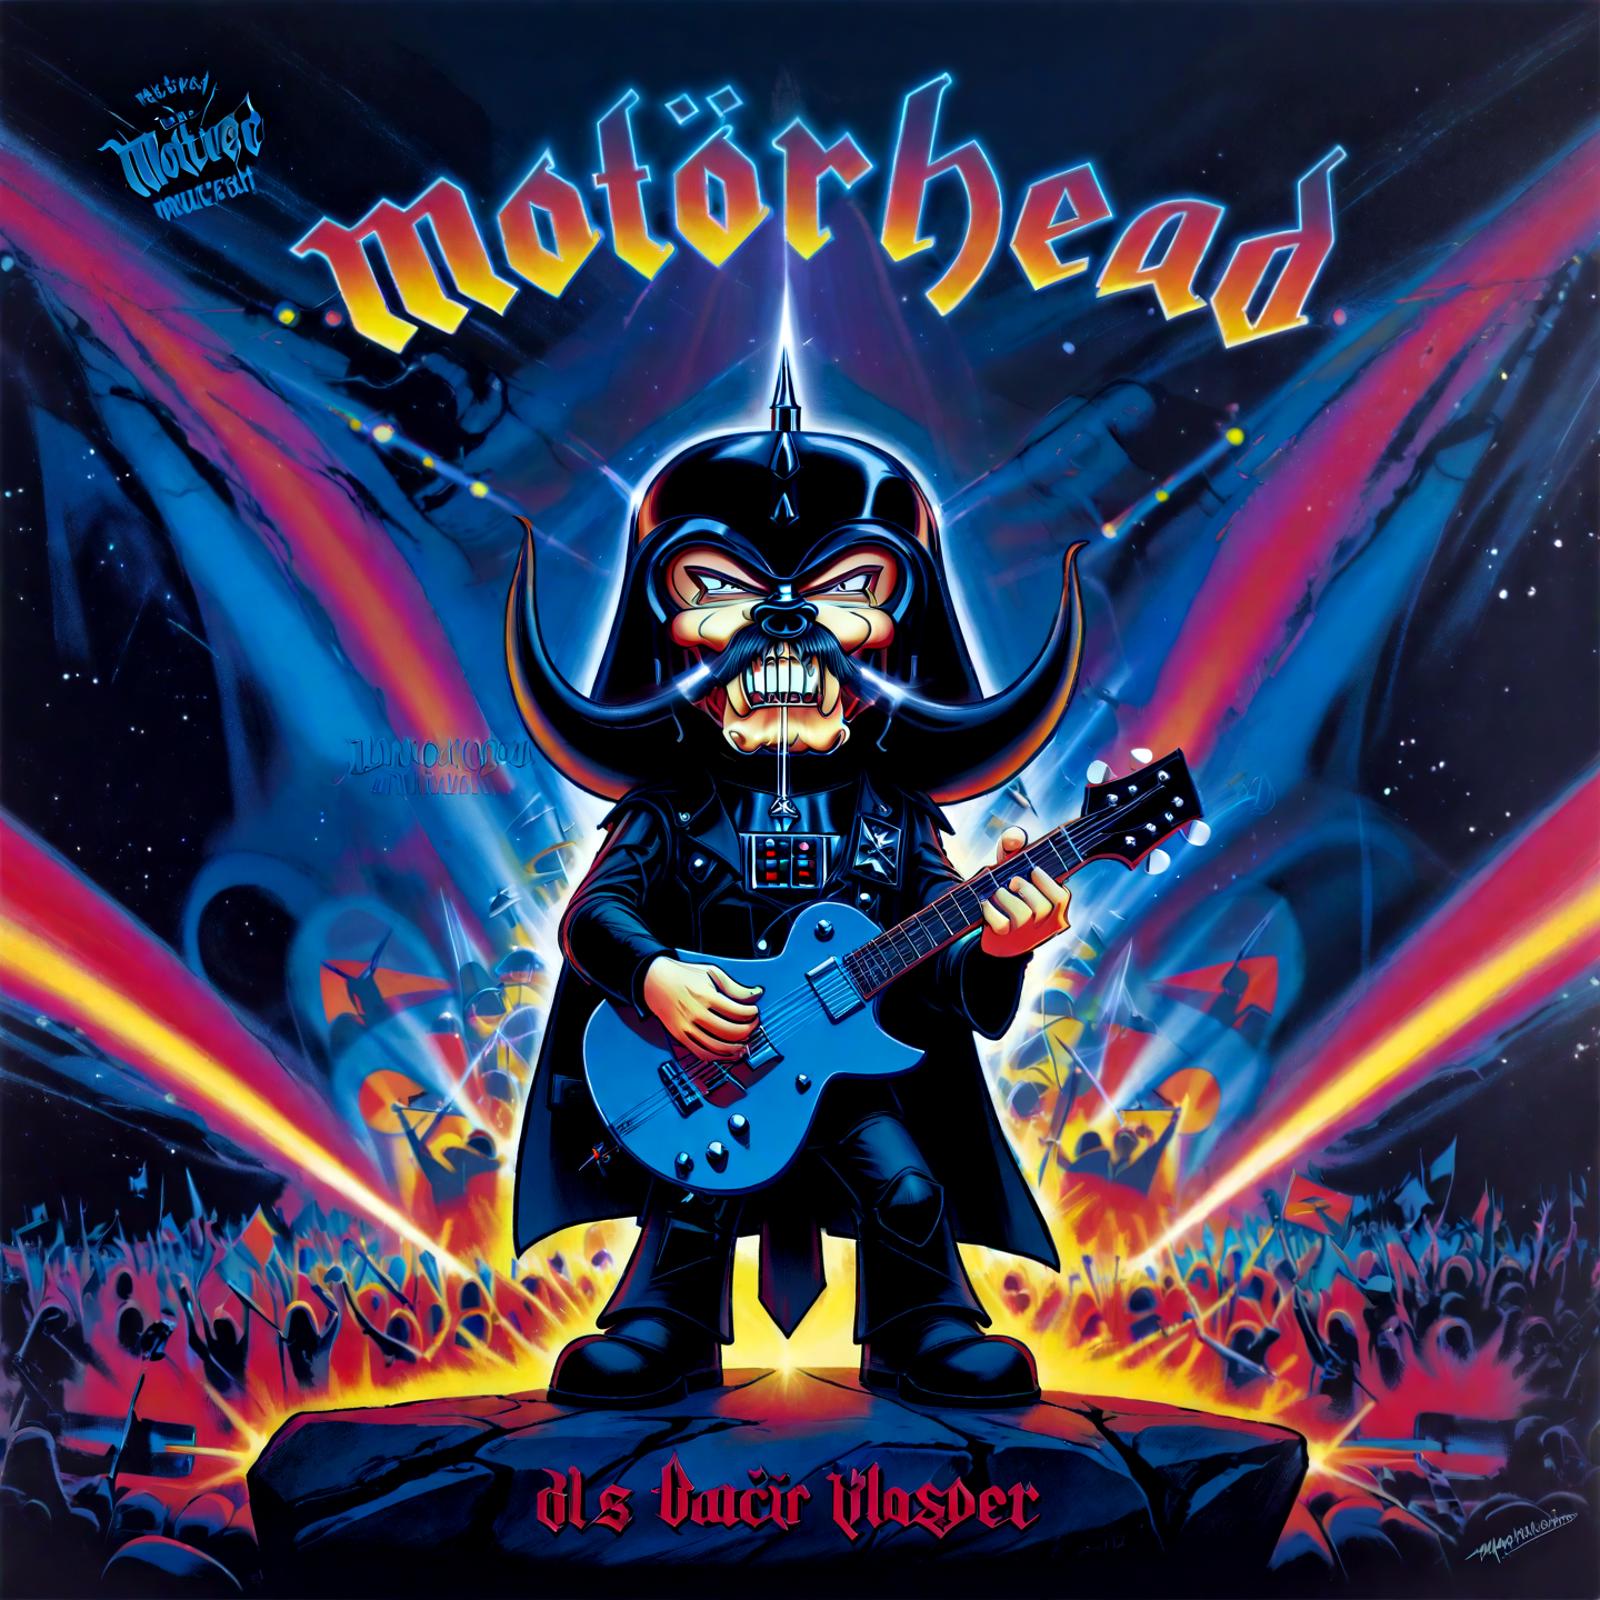 Motörhead Record Cover [SDXL] image by denrakeiw